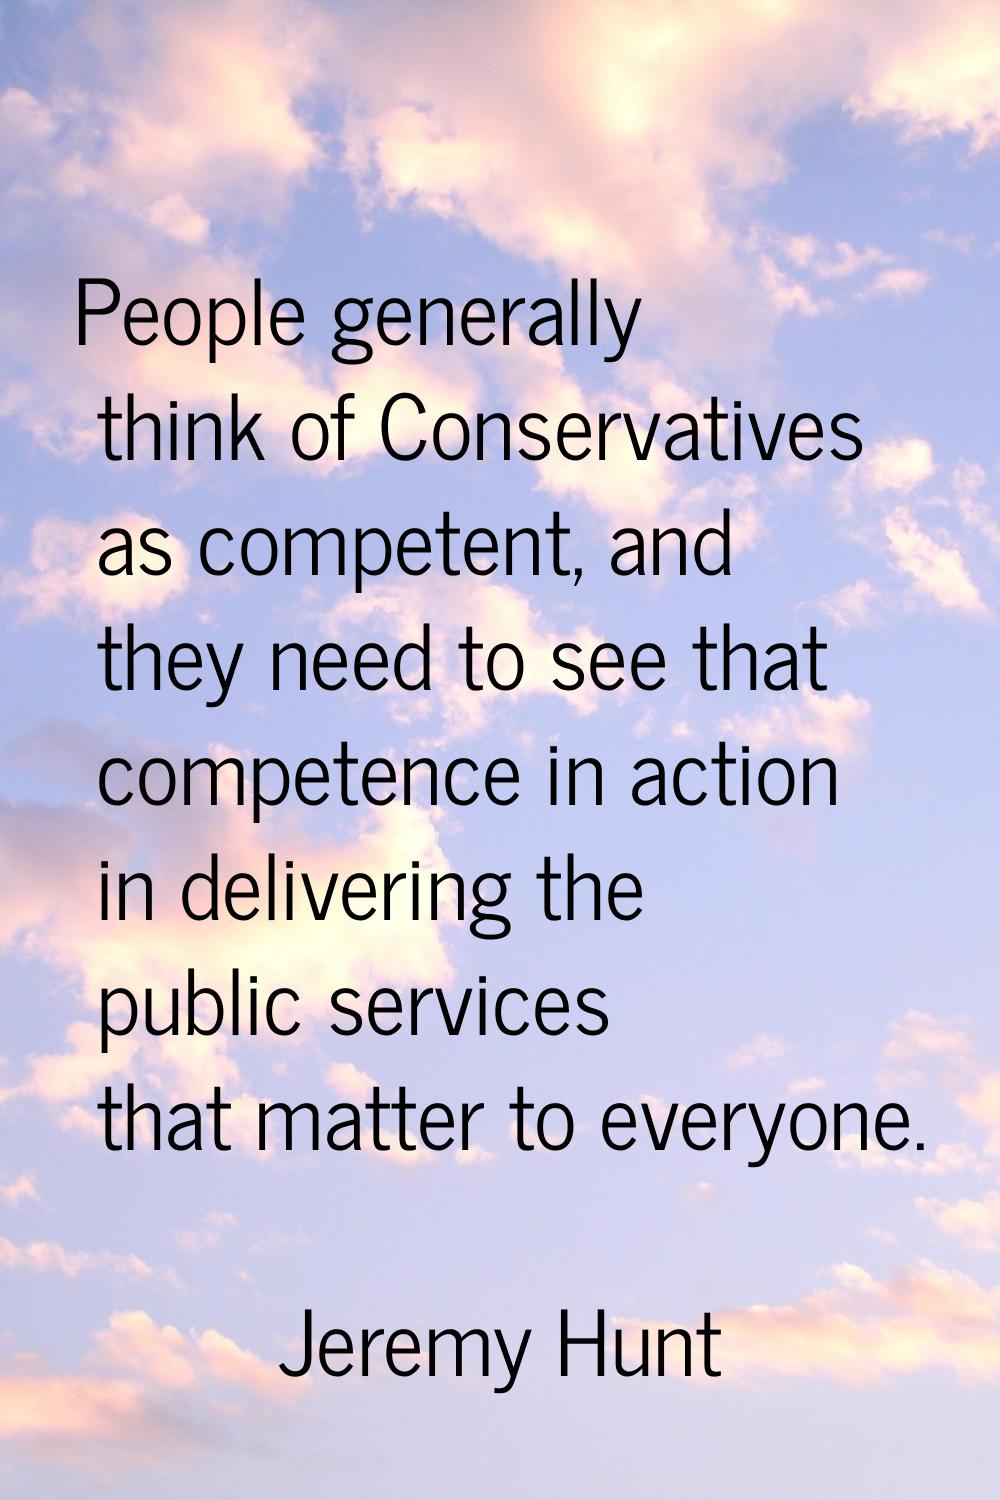 People generally think of Conservatives as competent, and they need to see that competence in actio